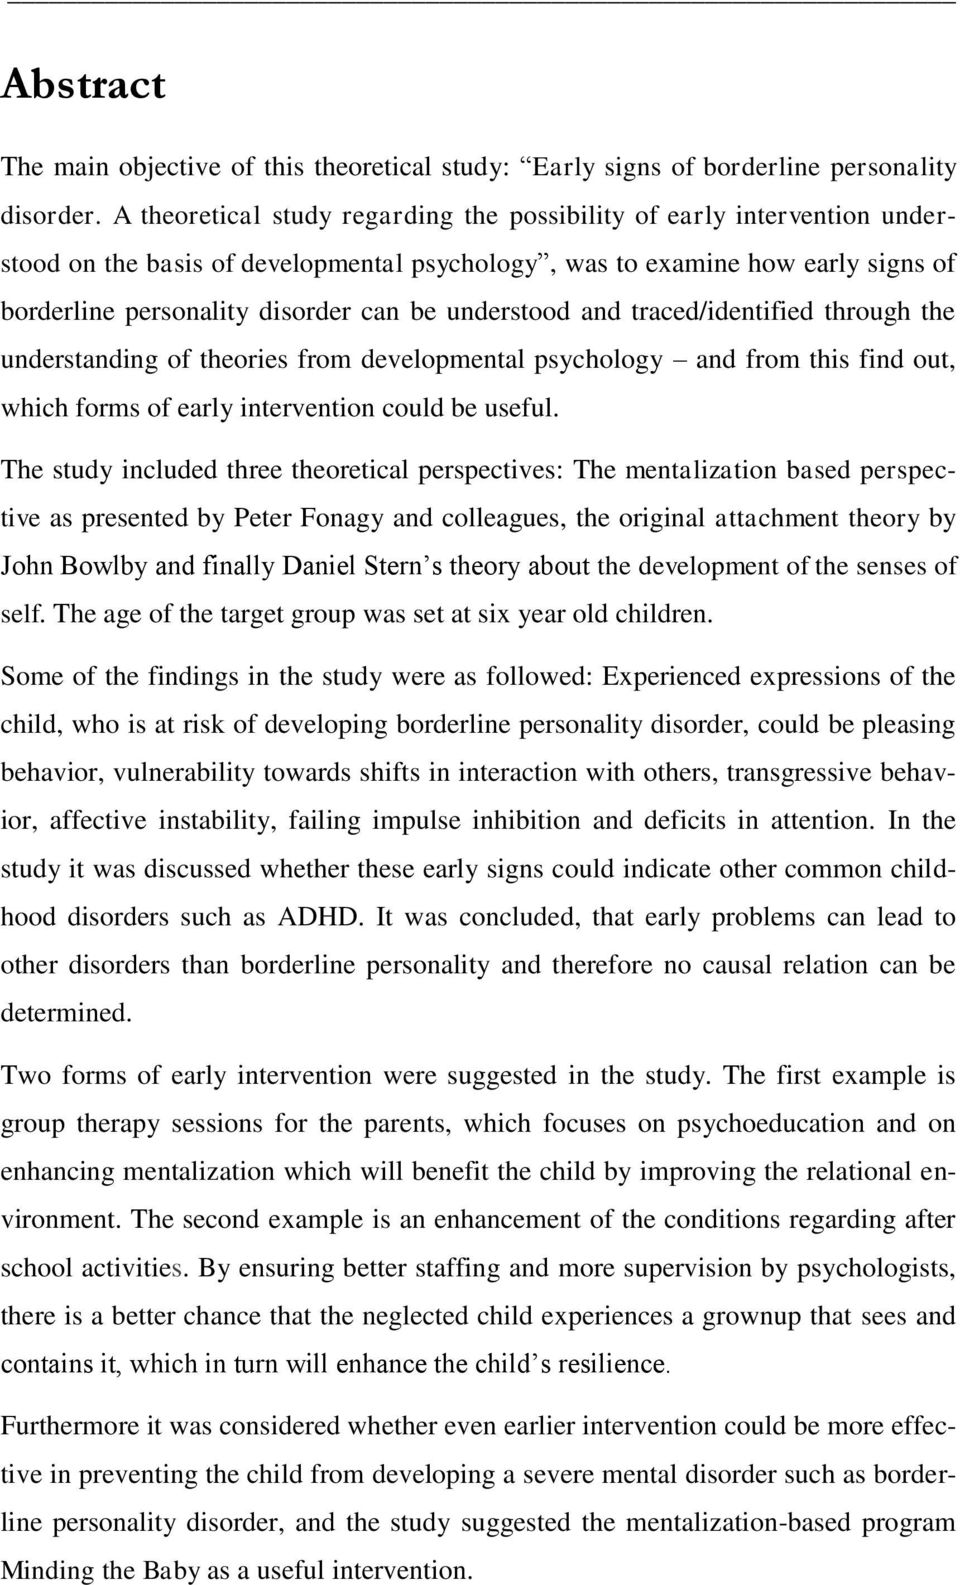 understood and traced/identified through the understanding of theories from developmental psychology and from this find out, which forms of early intervention could be useful.